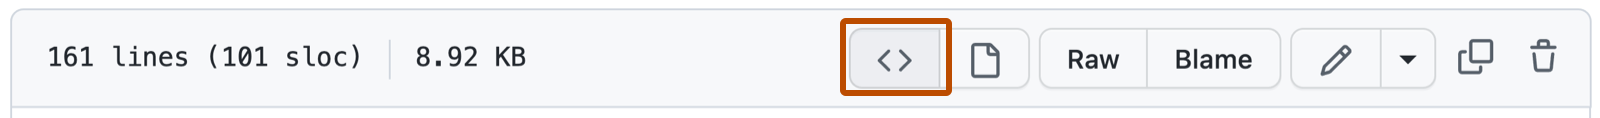 Screenshot of a Markdown file in a GitHub repository showing options for interacting with the file. The button to display the source blob is outlined in dark orange.